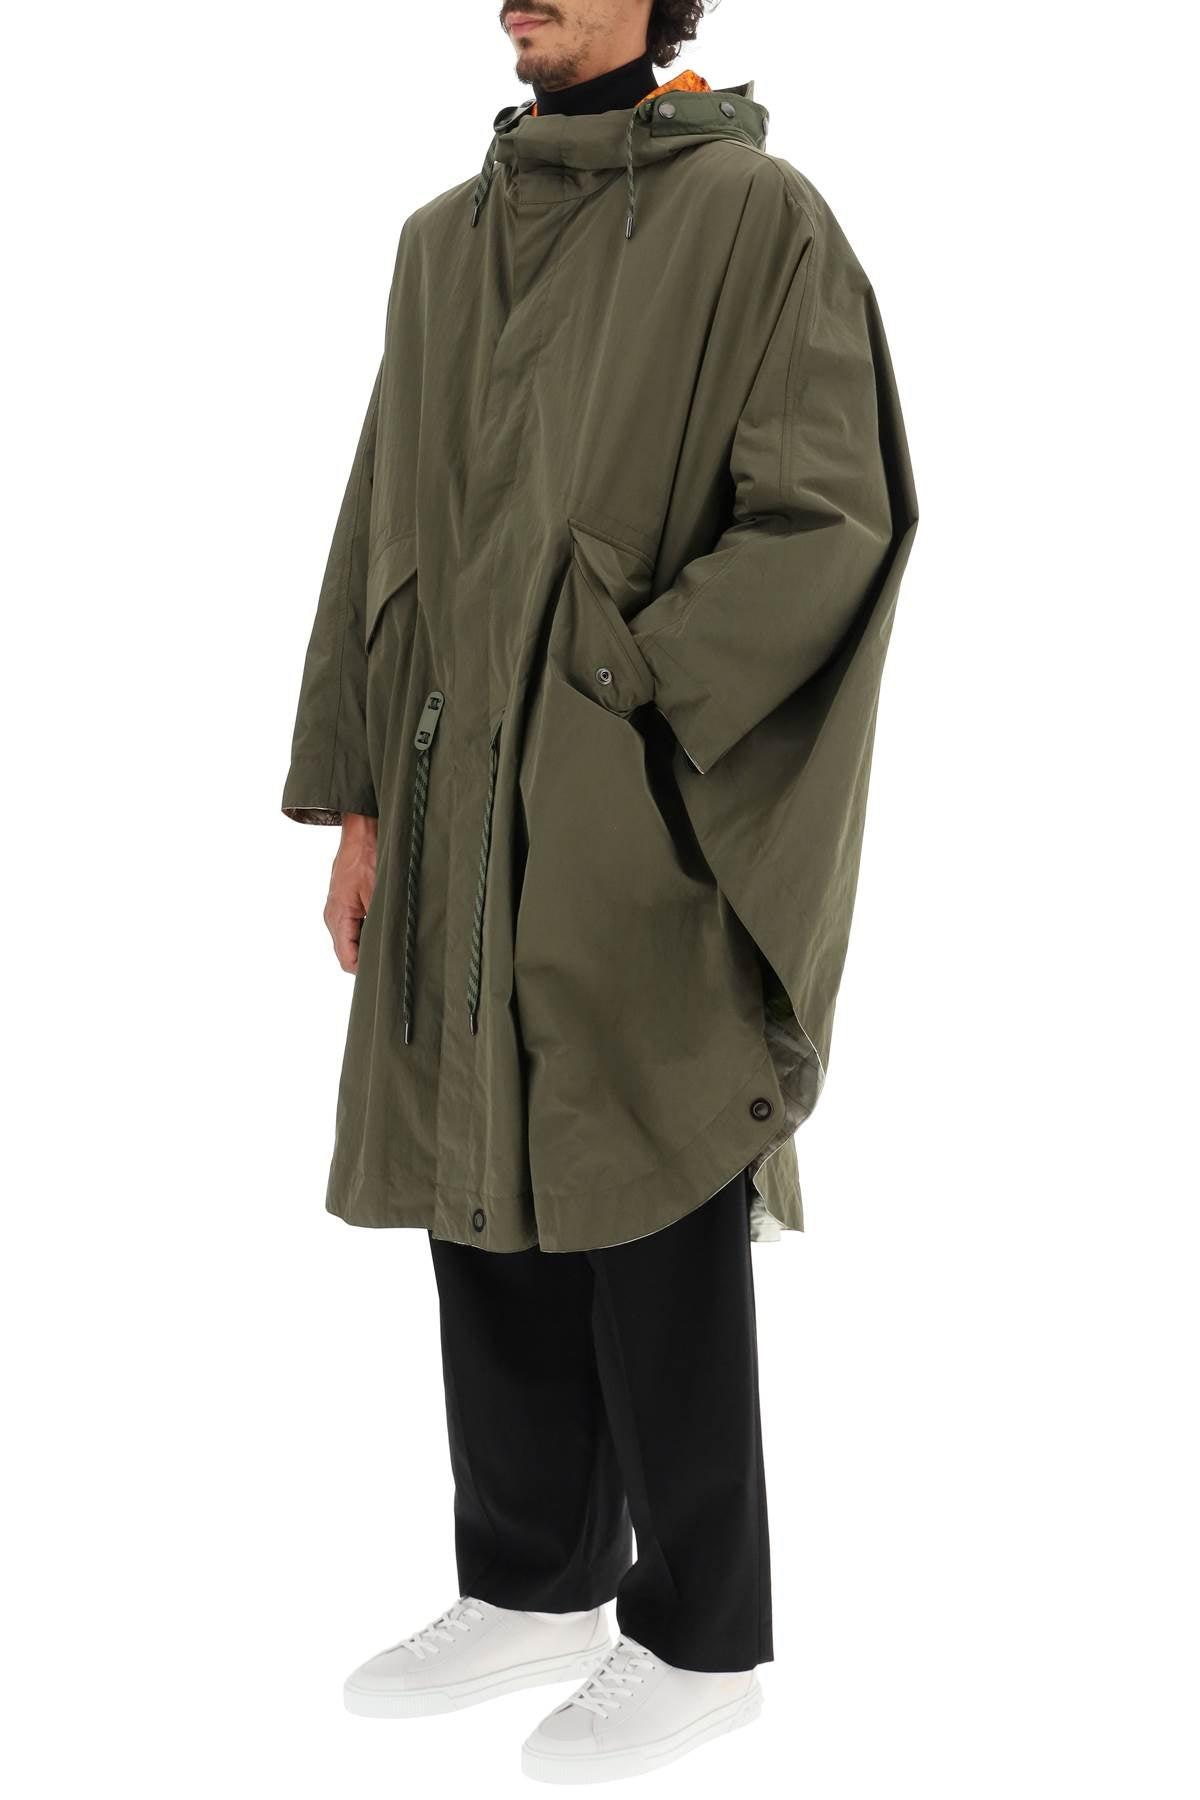 Burberry Cotton Packaway Hooded Cape in Khaki (Green) for Men 